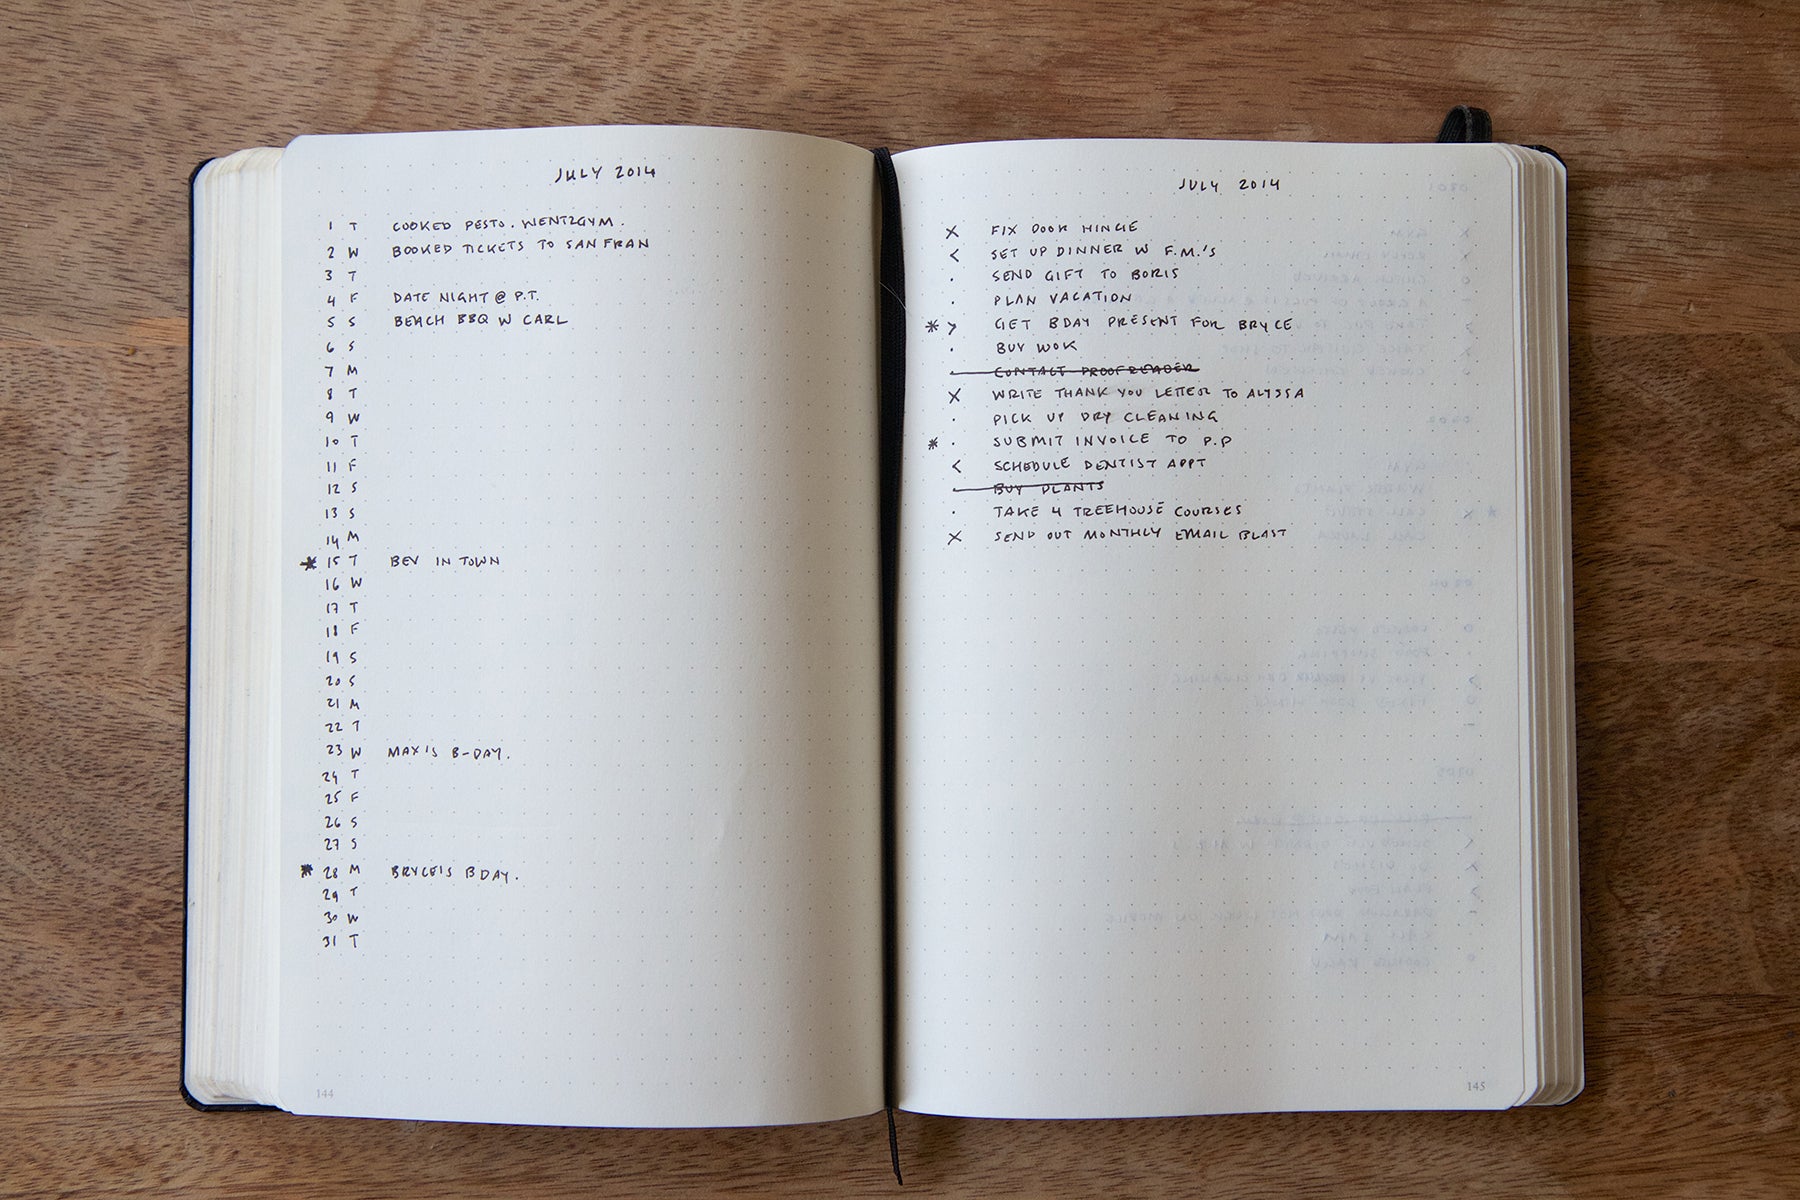 A "monthly log" layout in a typical Bullet Journal setup. 